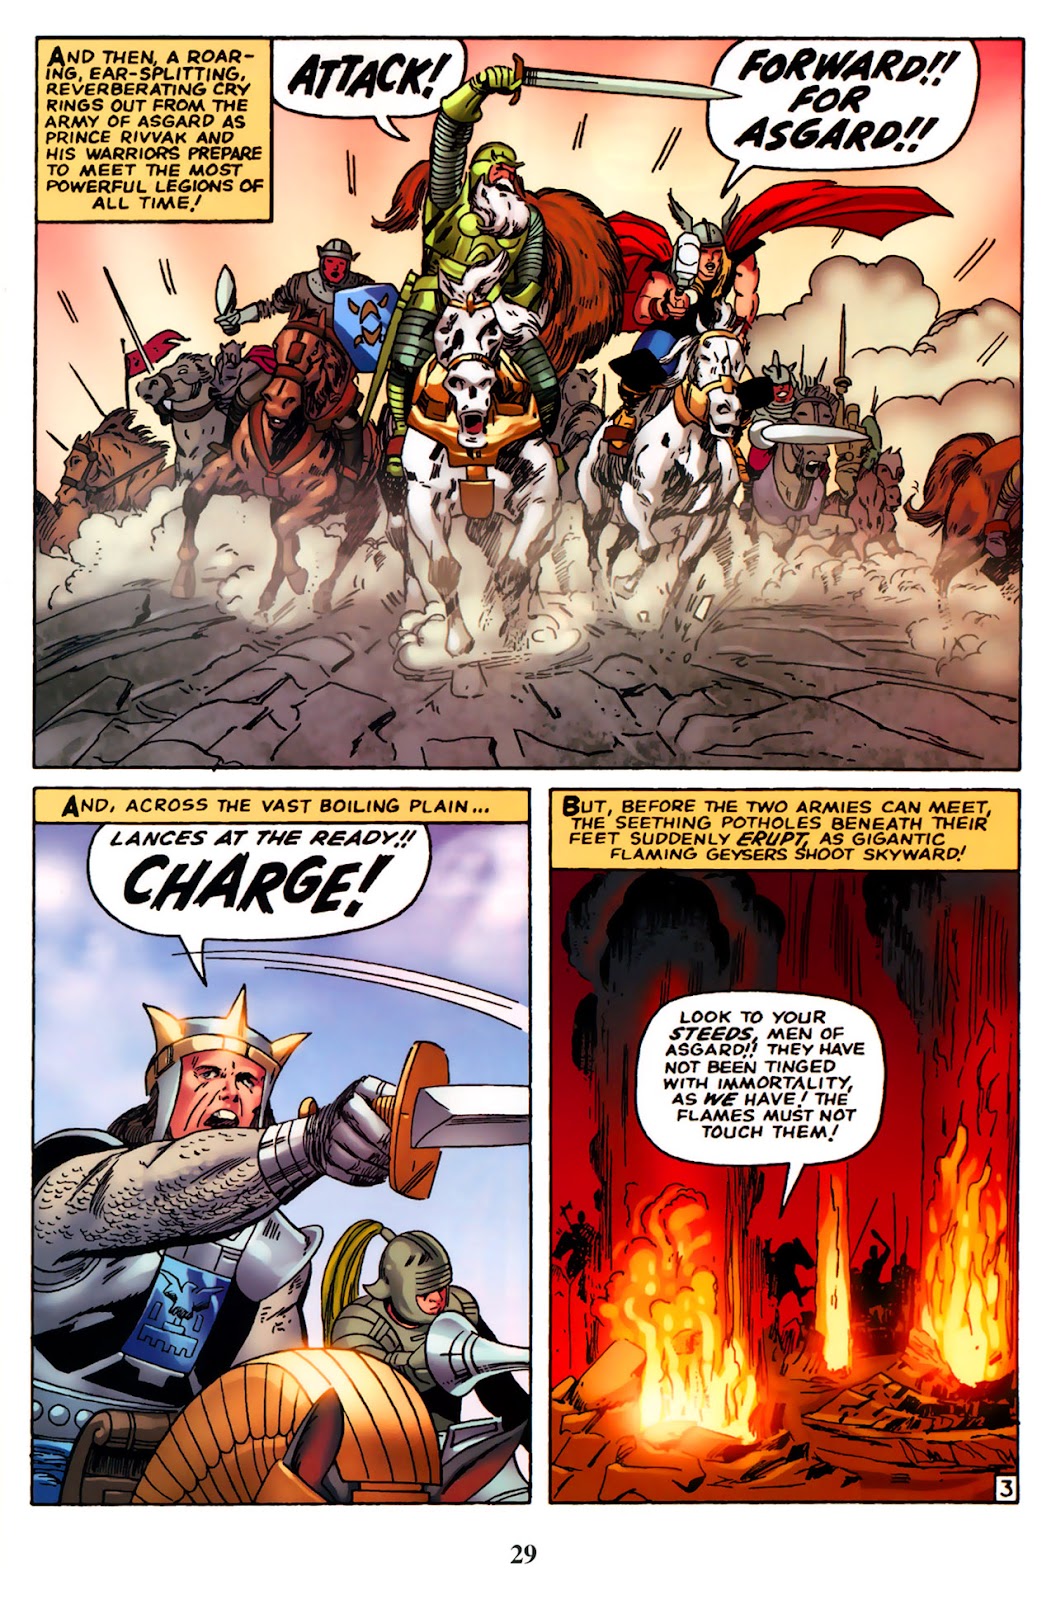 Thor: Tales of Asgard by Stan Lee & Jack Kirby issue 2 - Page 31